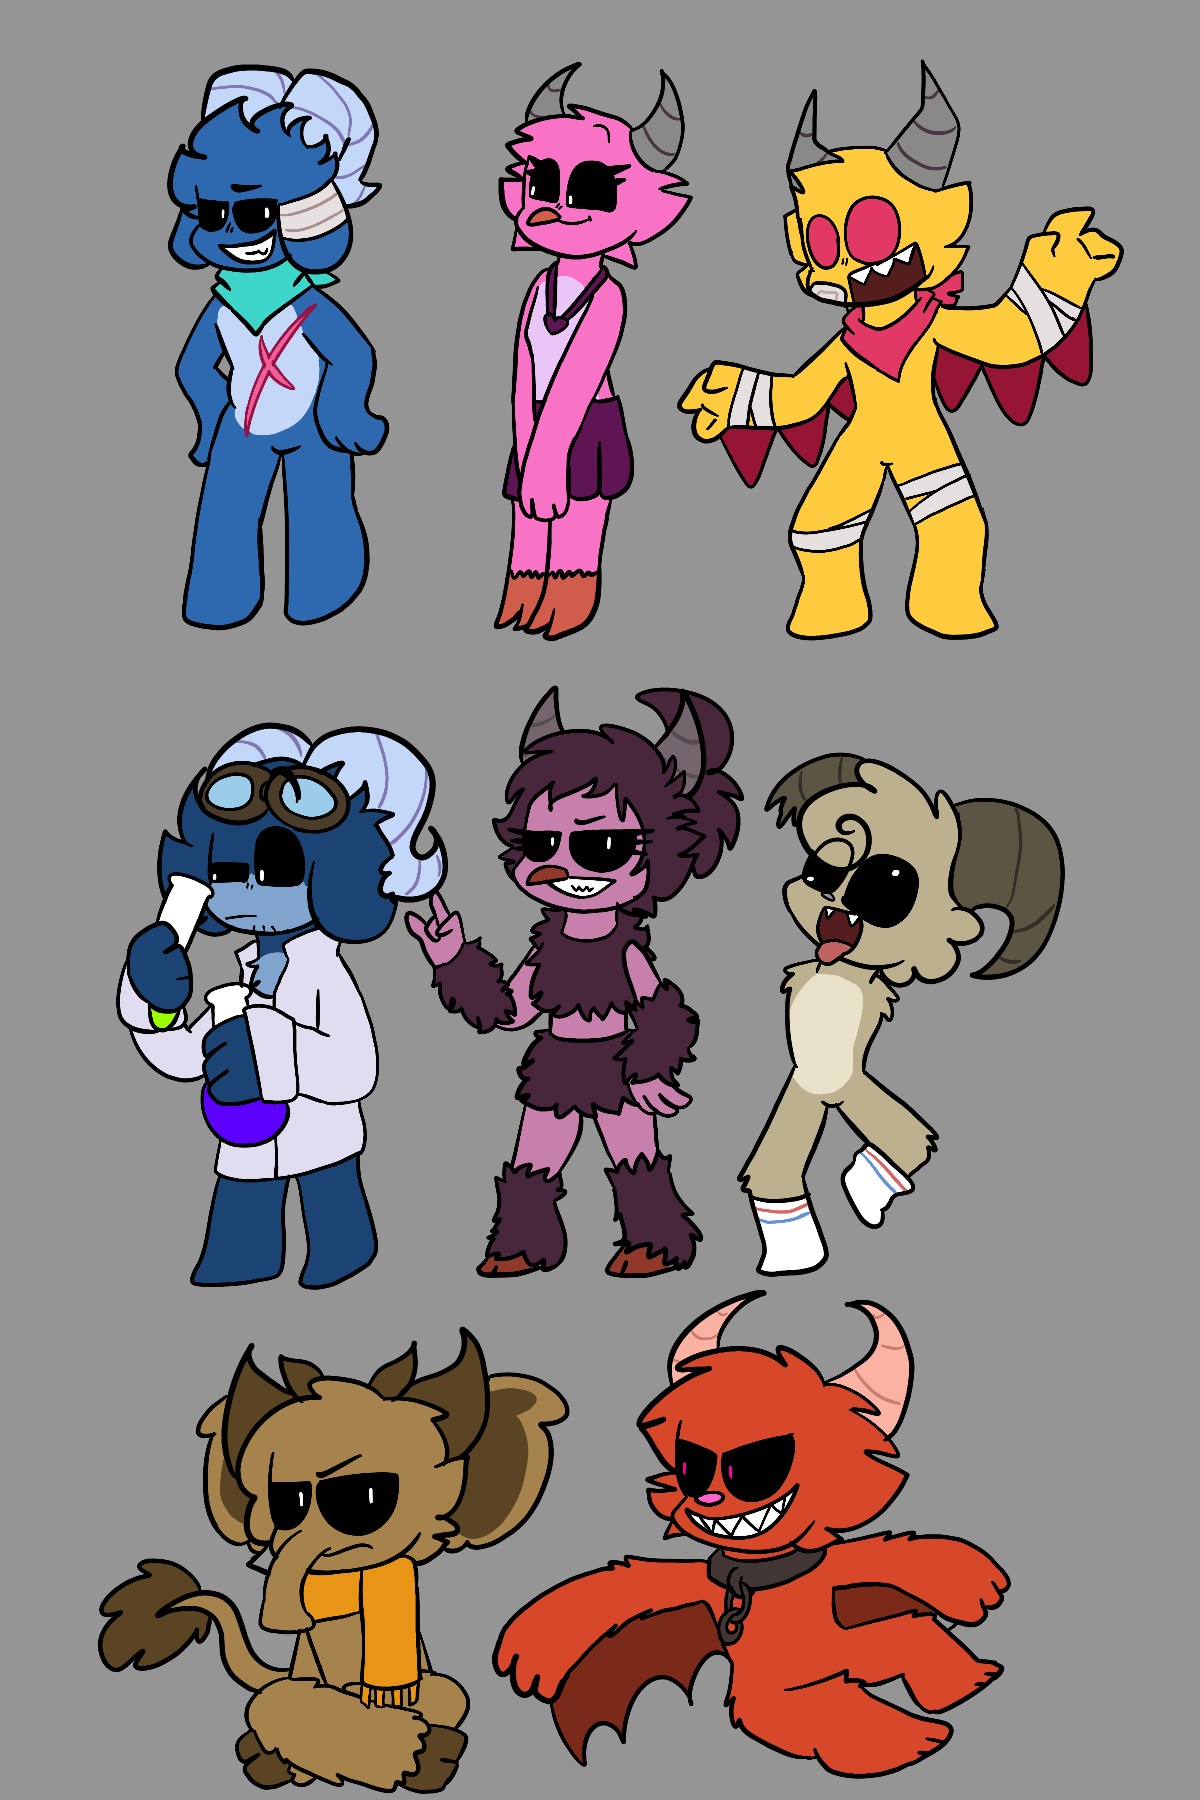 doors monsters in my style by KumaDraws334 on DeviantArt